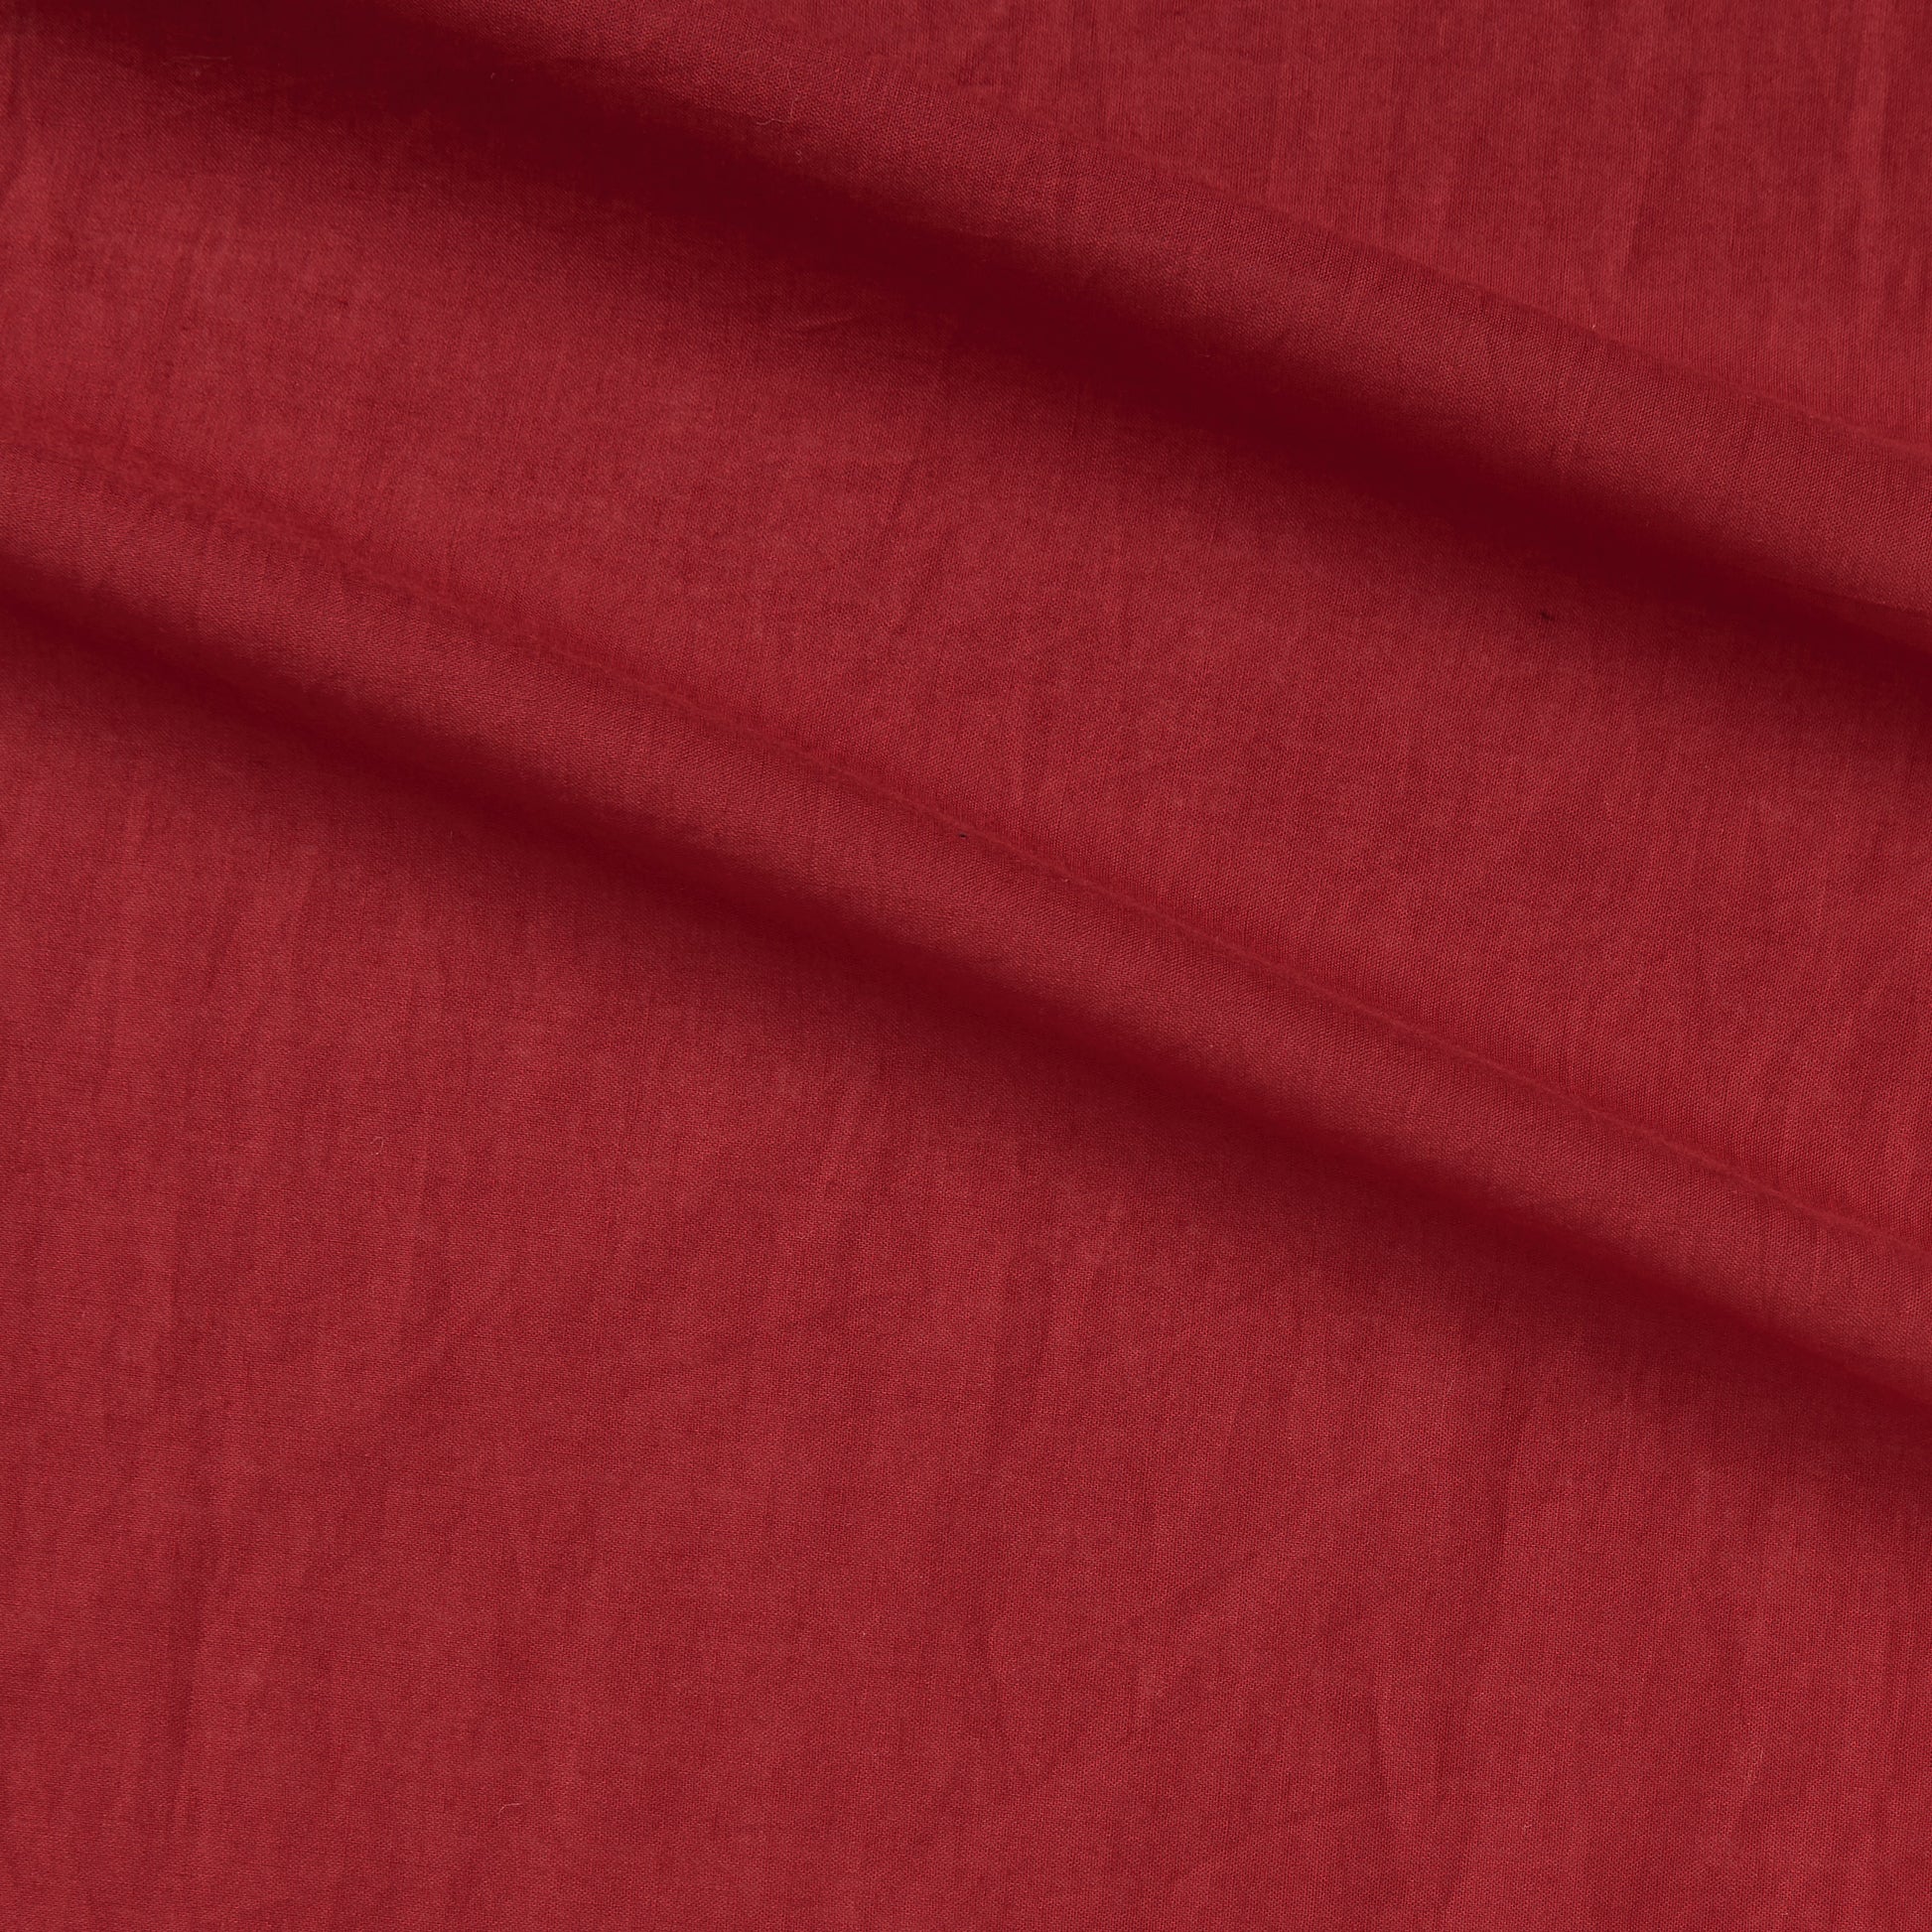 Haitana presenting the Red color version of a Fine light weight breathable soft smooth pure cotton voile